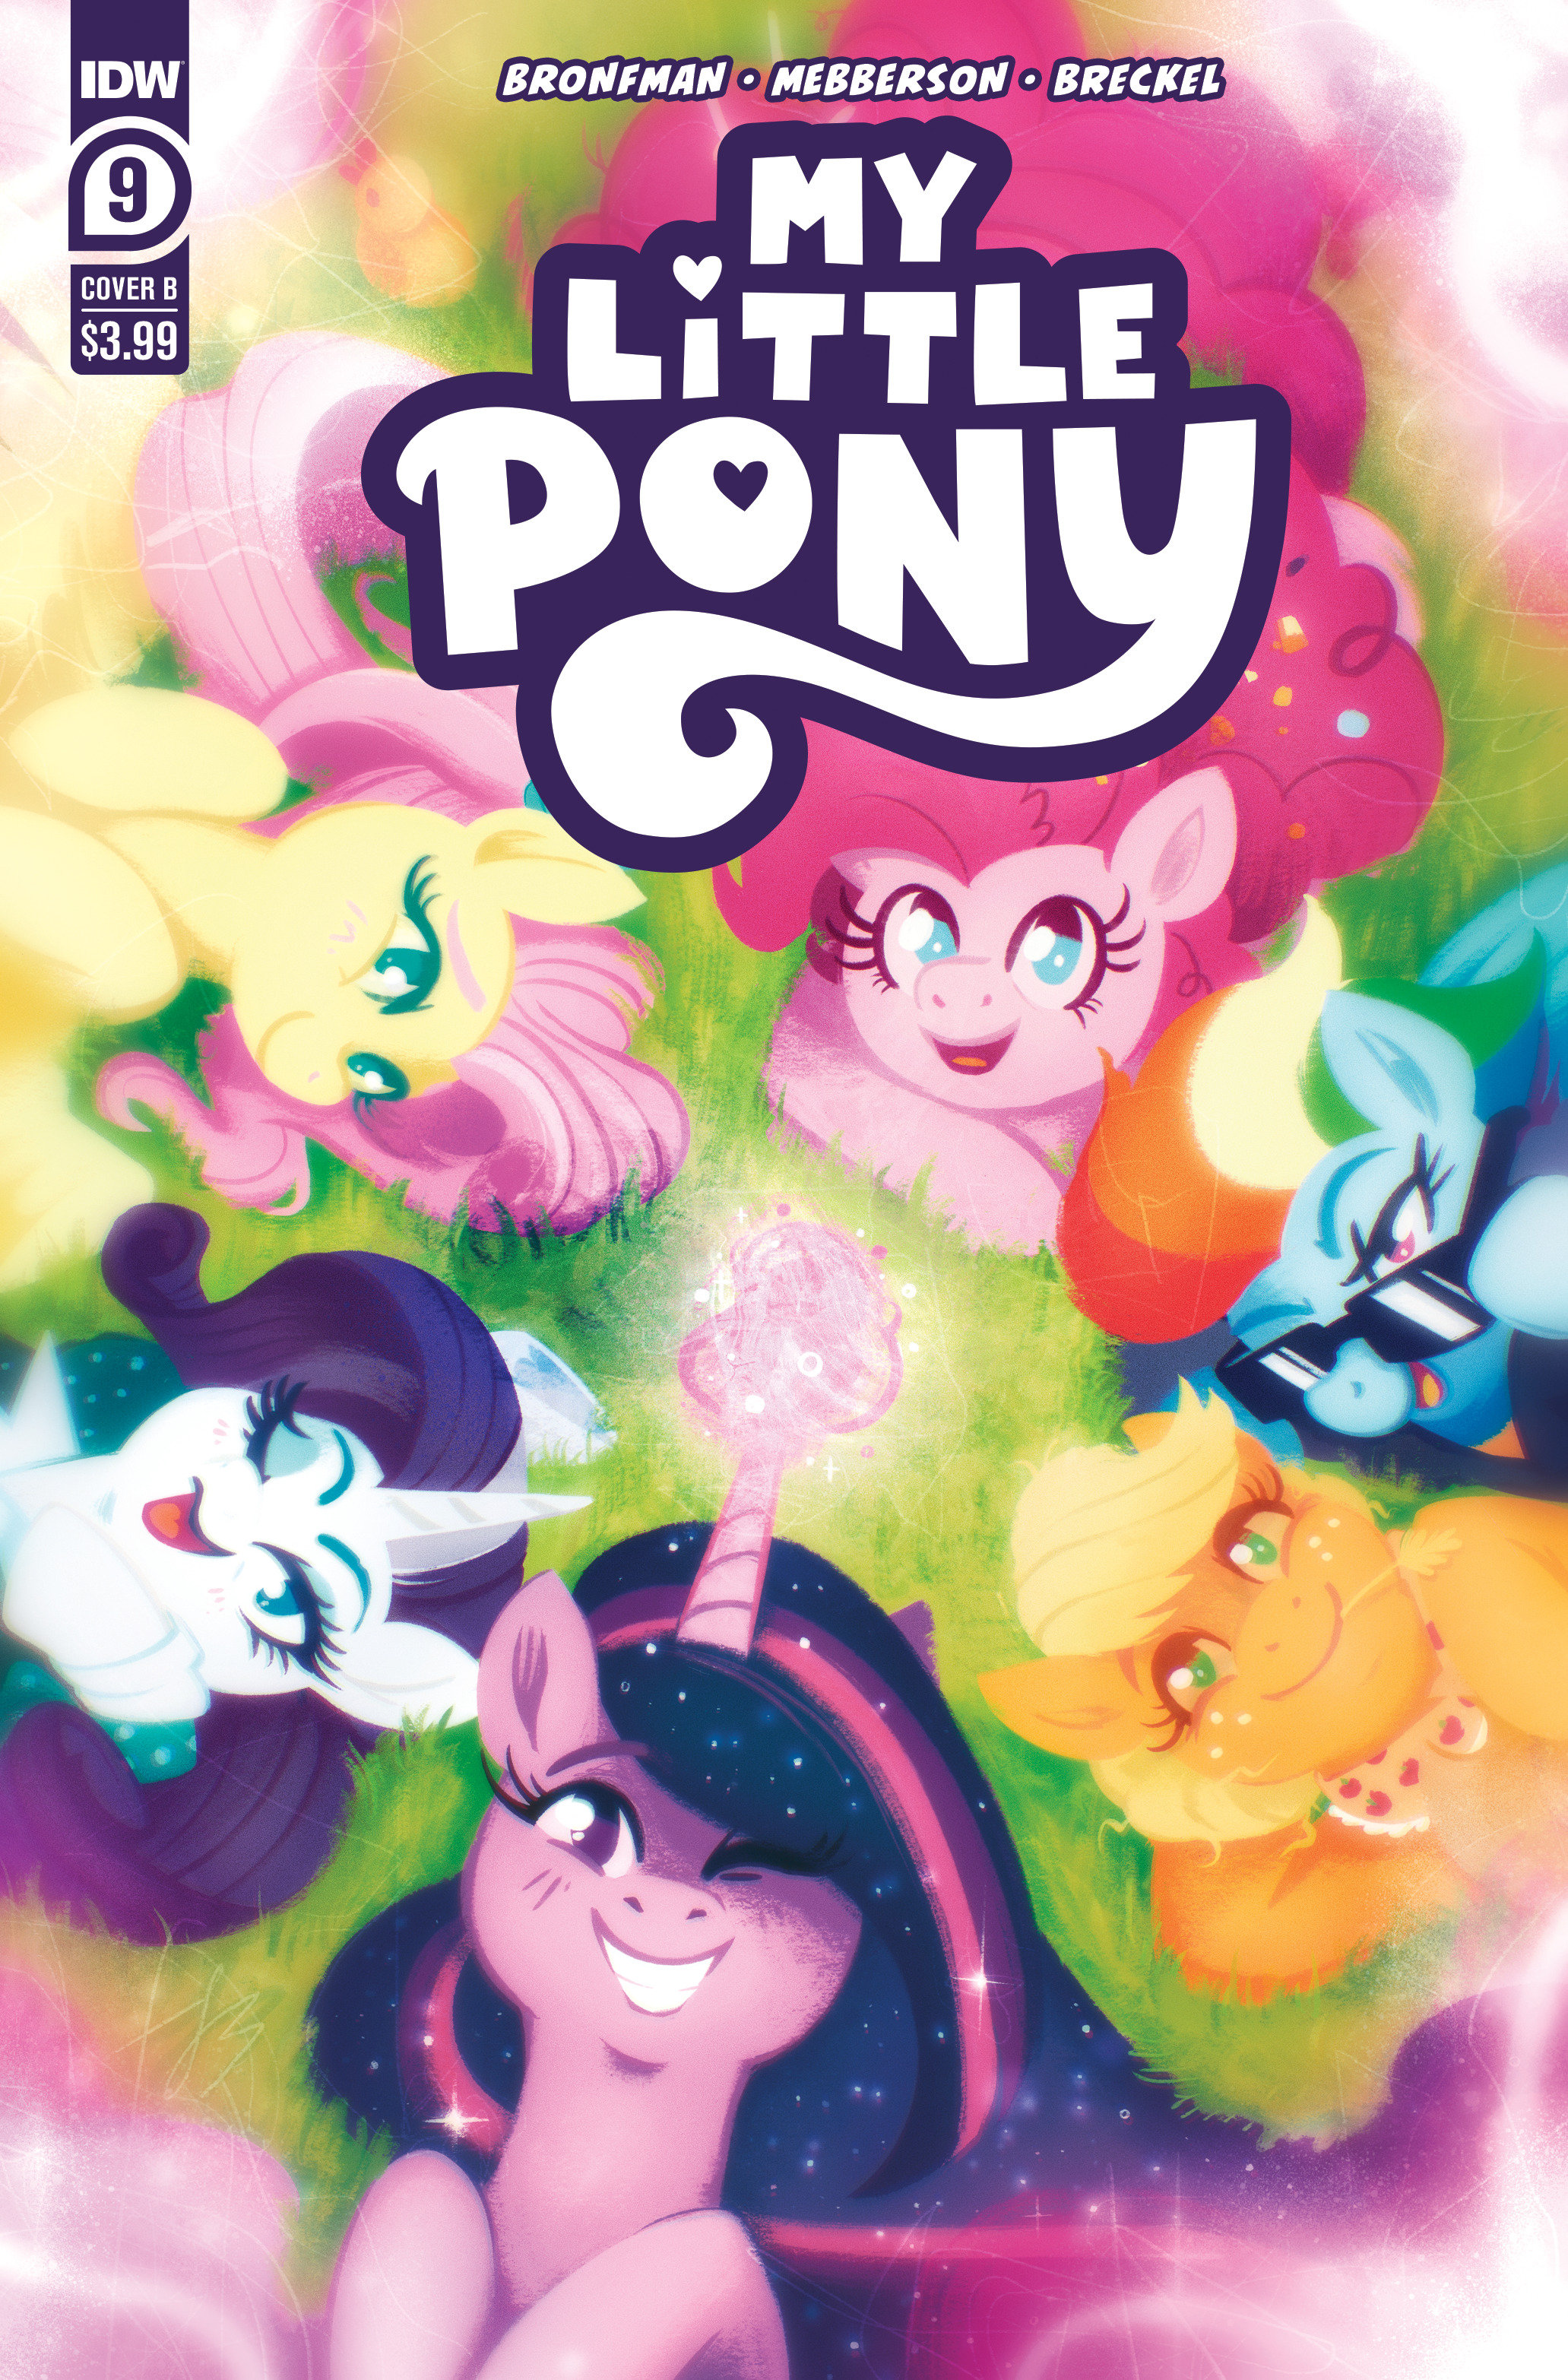 Equestria Daily - MLP Stuff!: The Generation 5 My Little Pony Episode Guide